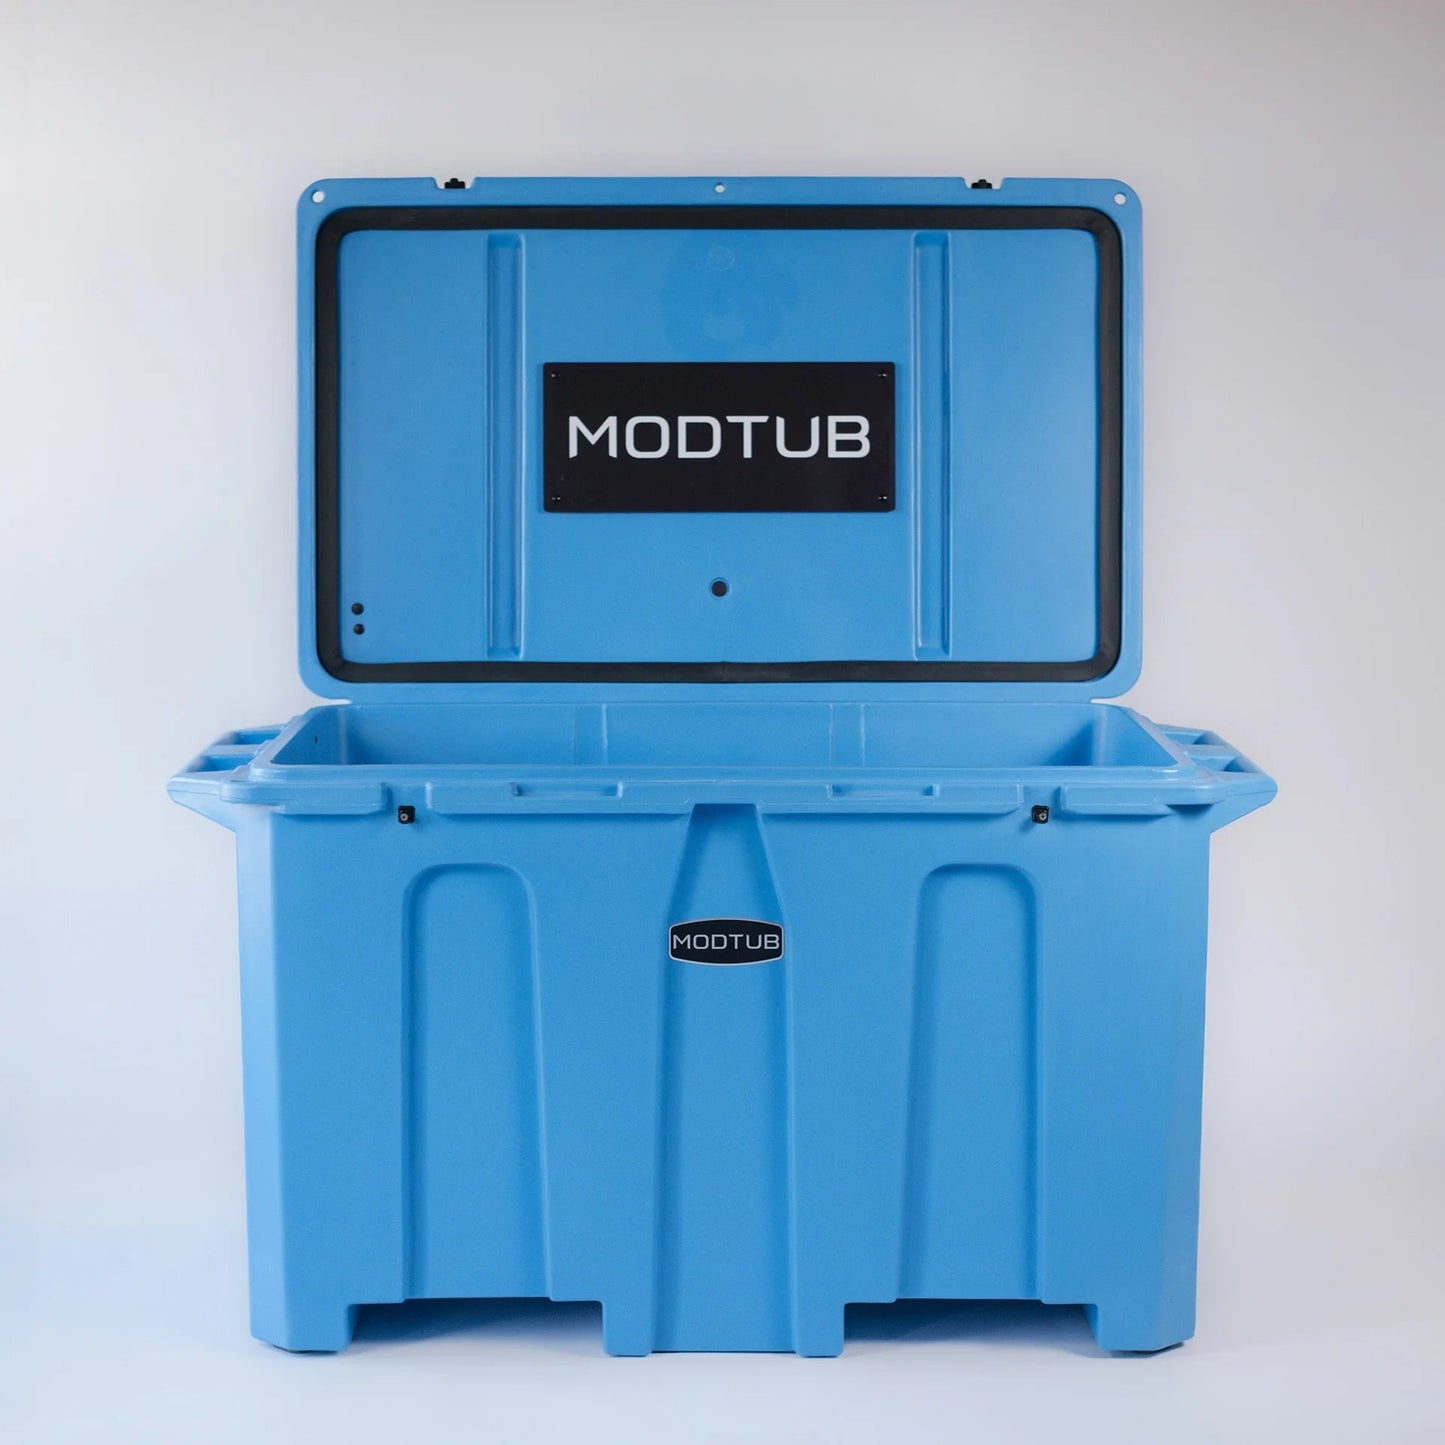 The ModTub - The Cold Plunge Store